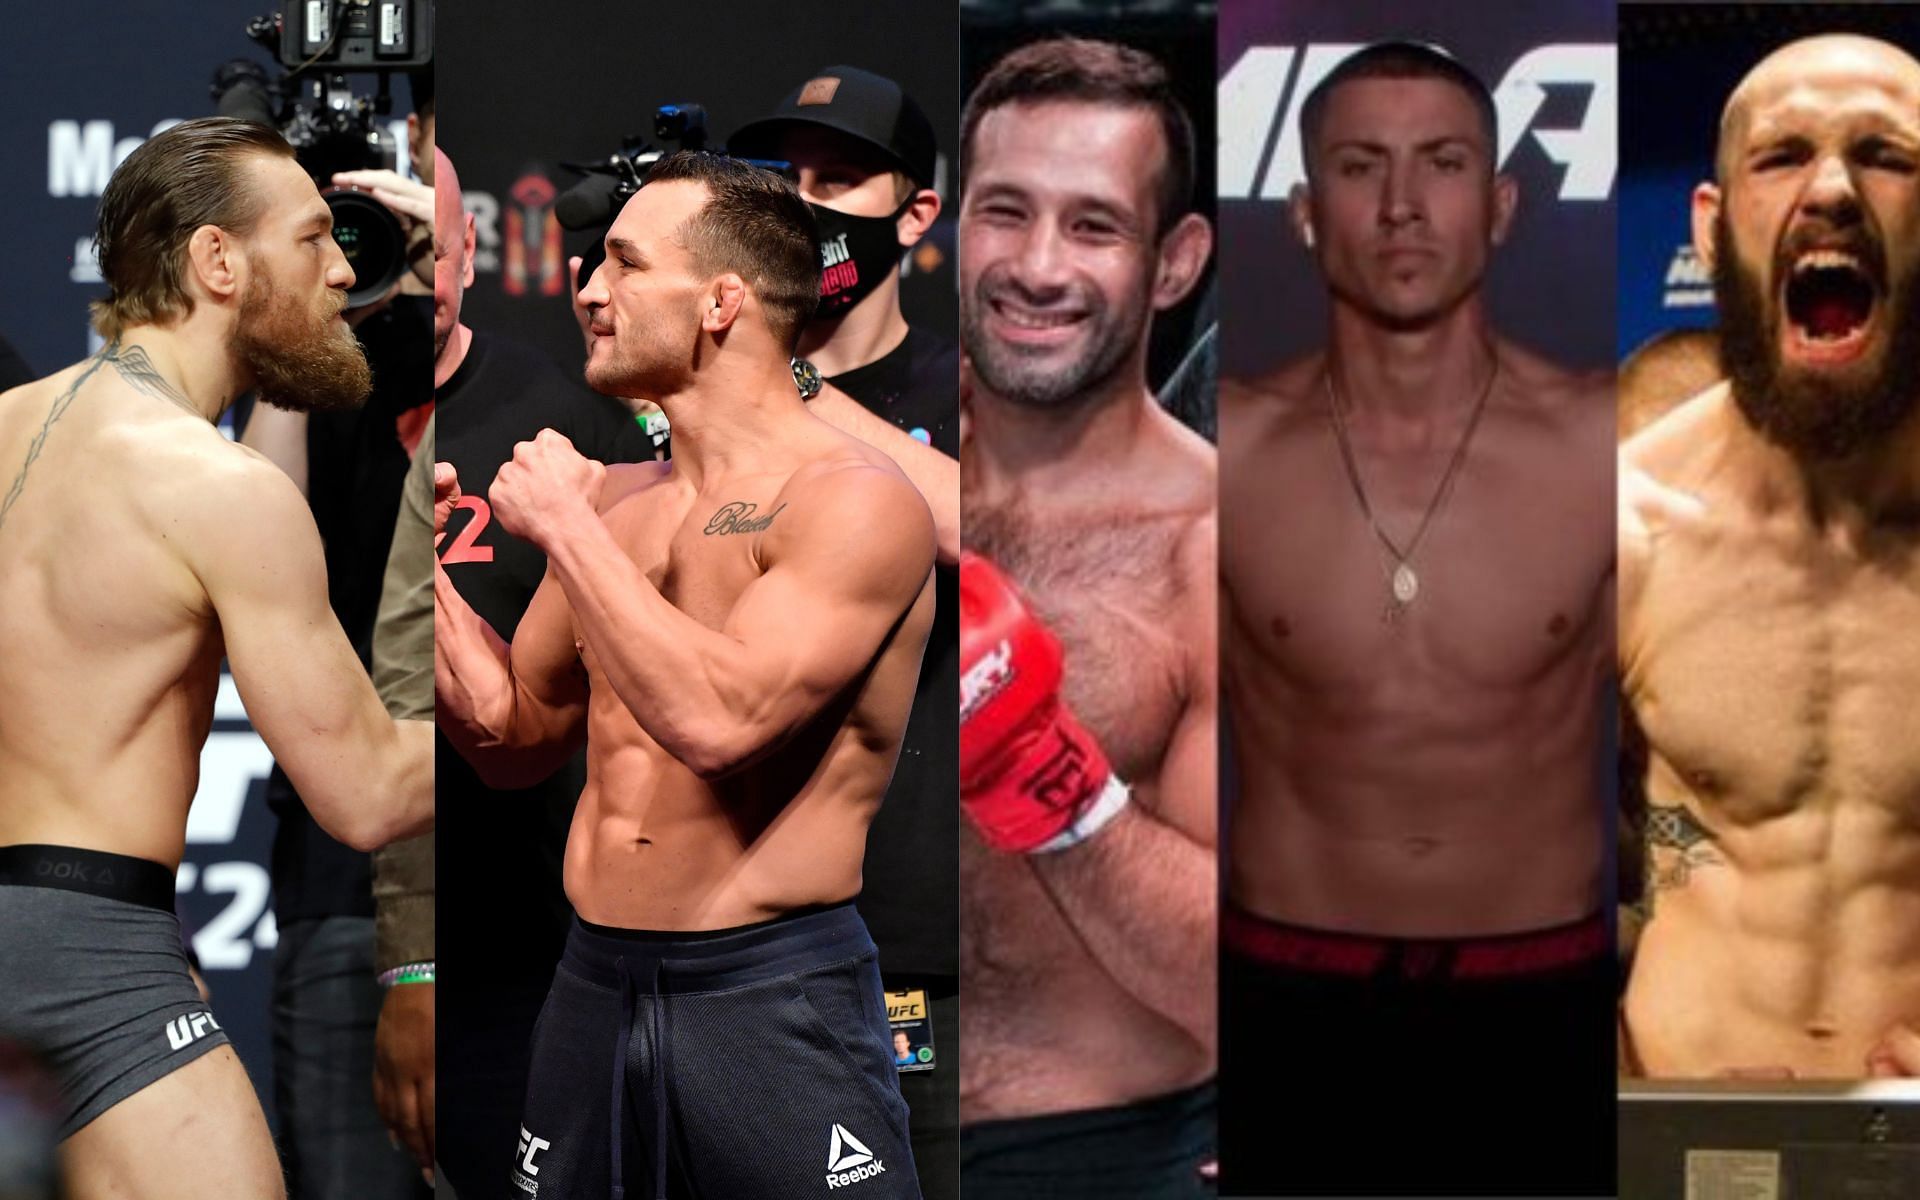 Conor McGregor, Michael Chandler, Nate Jennerman, Rico DiSciullo, and Carlos Vera (Image credits Getty Images and @joeyfights on Twitter)